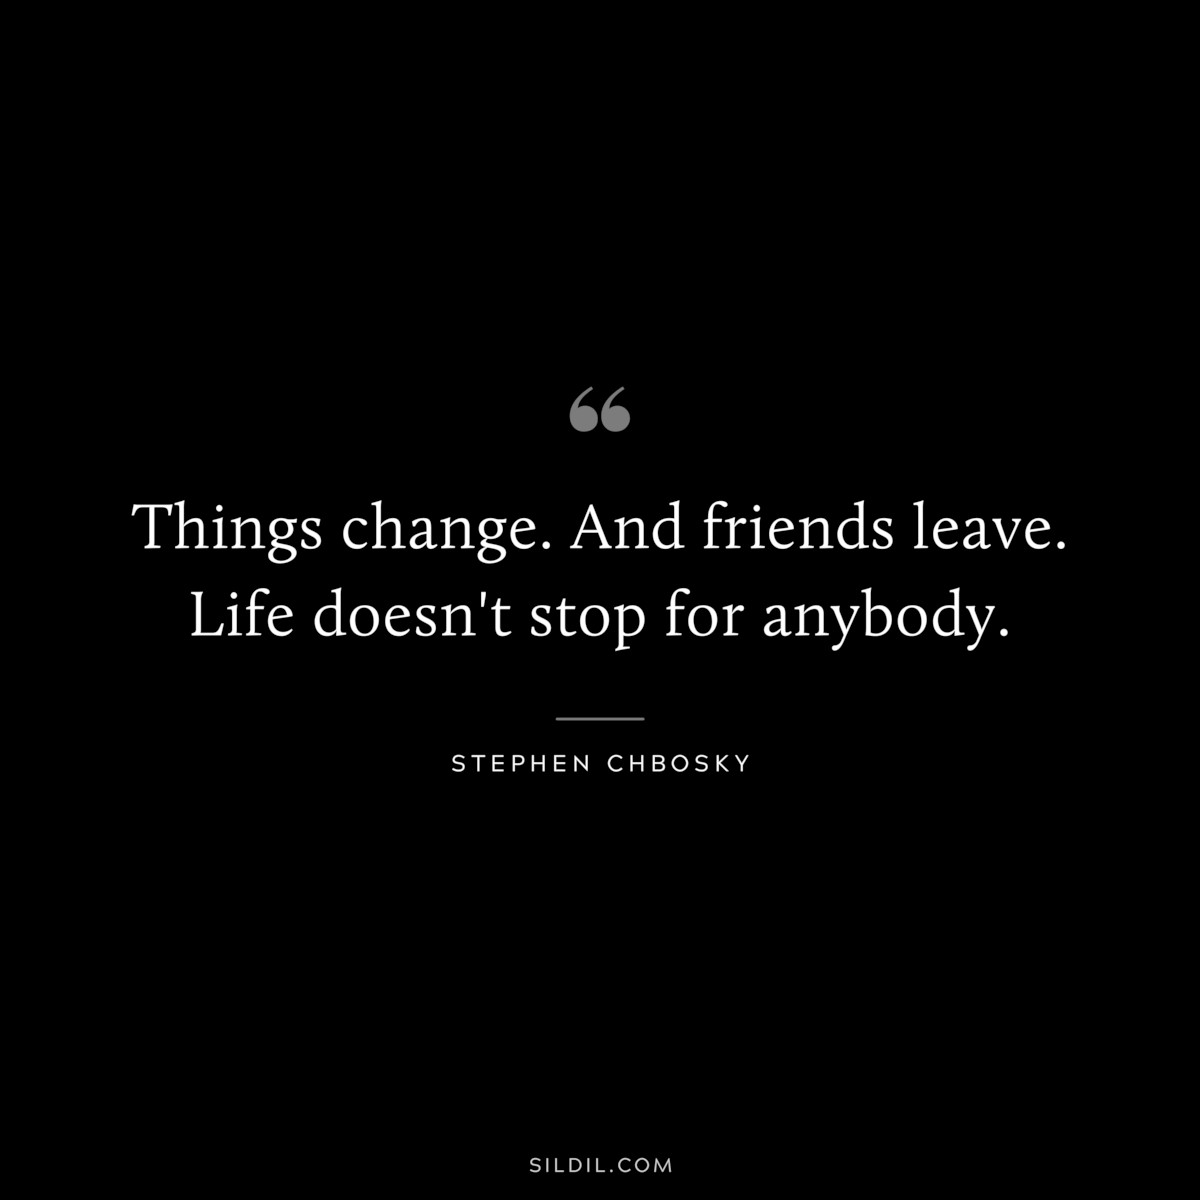 Things change. And friends leave. Life doesn't stop for anybody. ― Stephen Chbosky